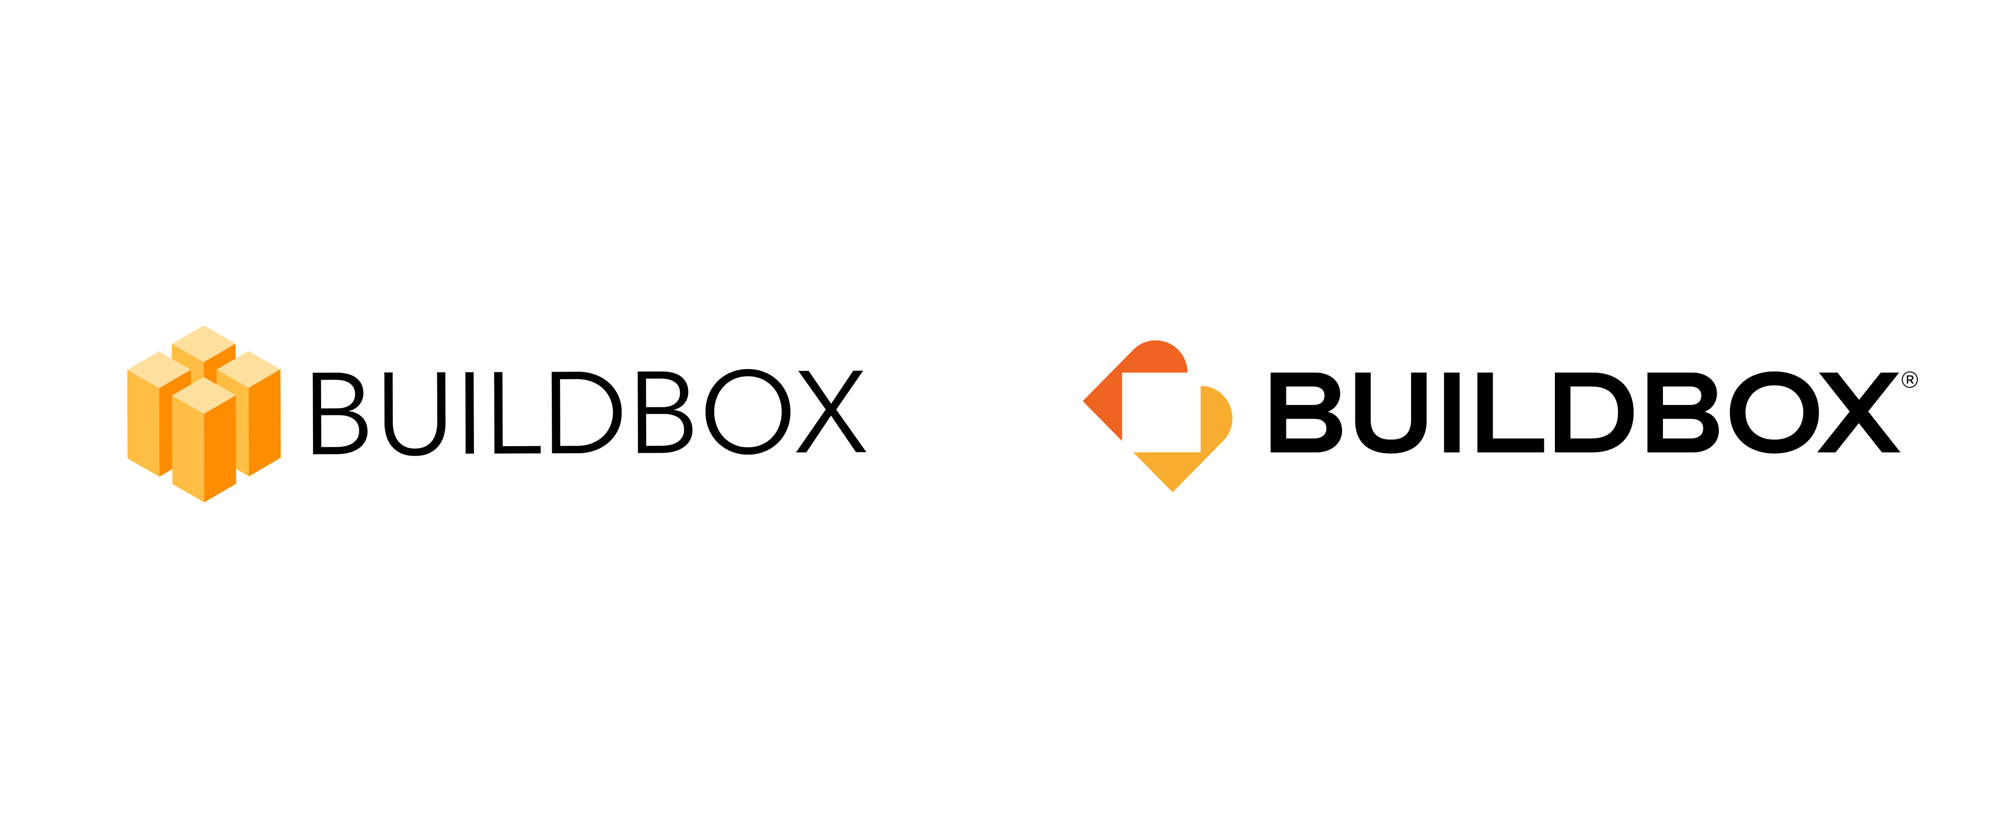 buildbox review 2017